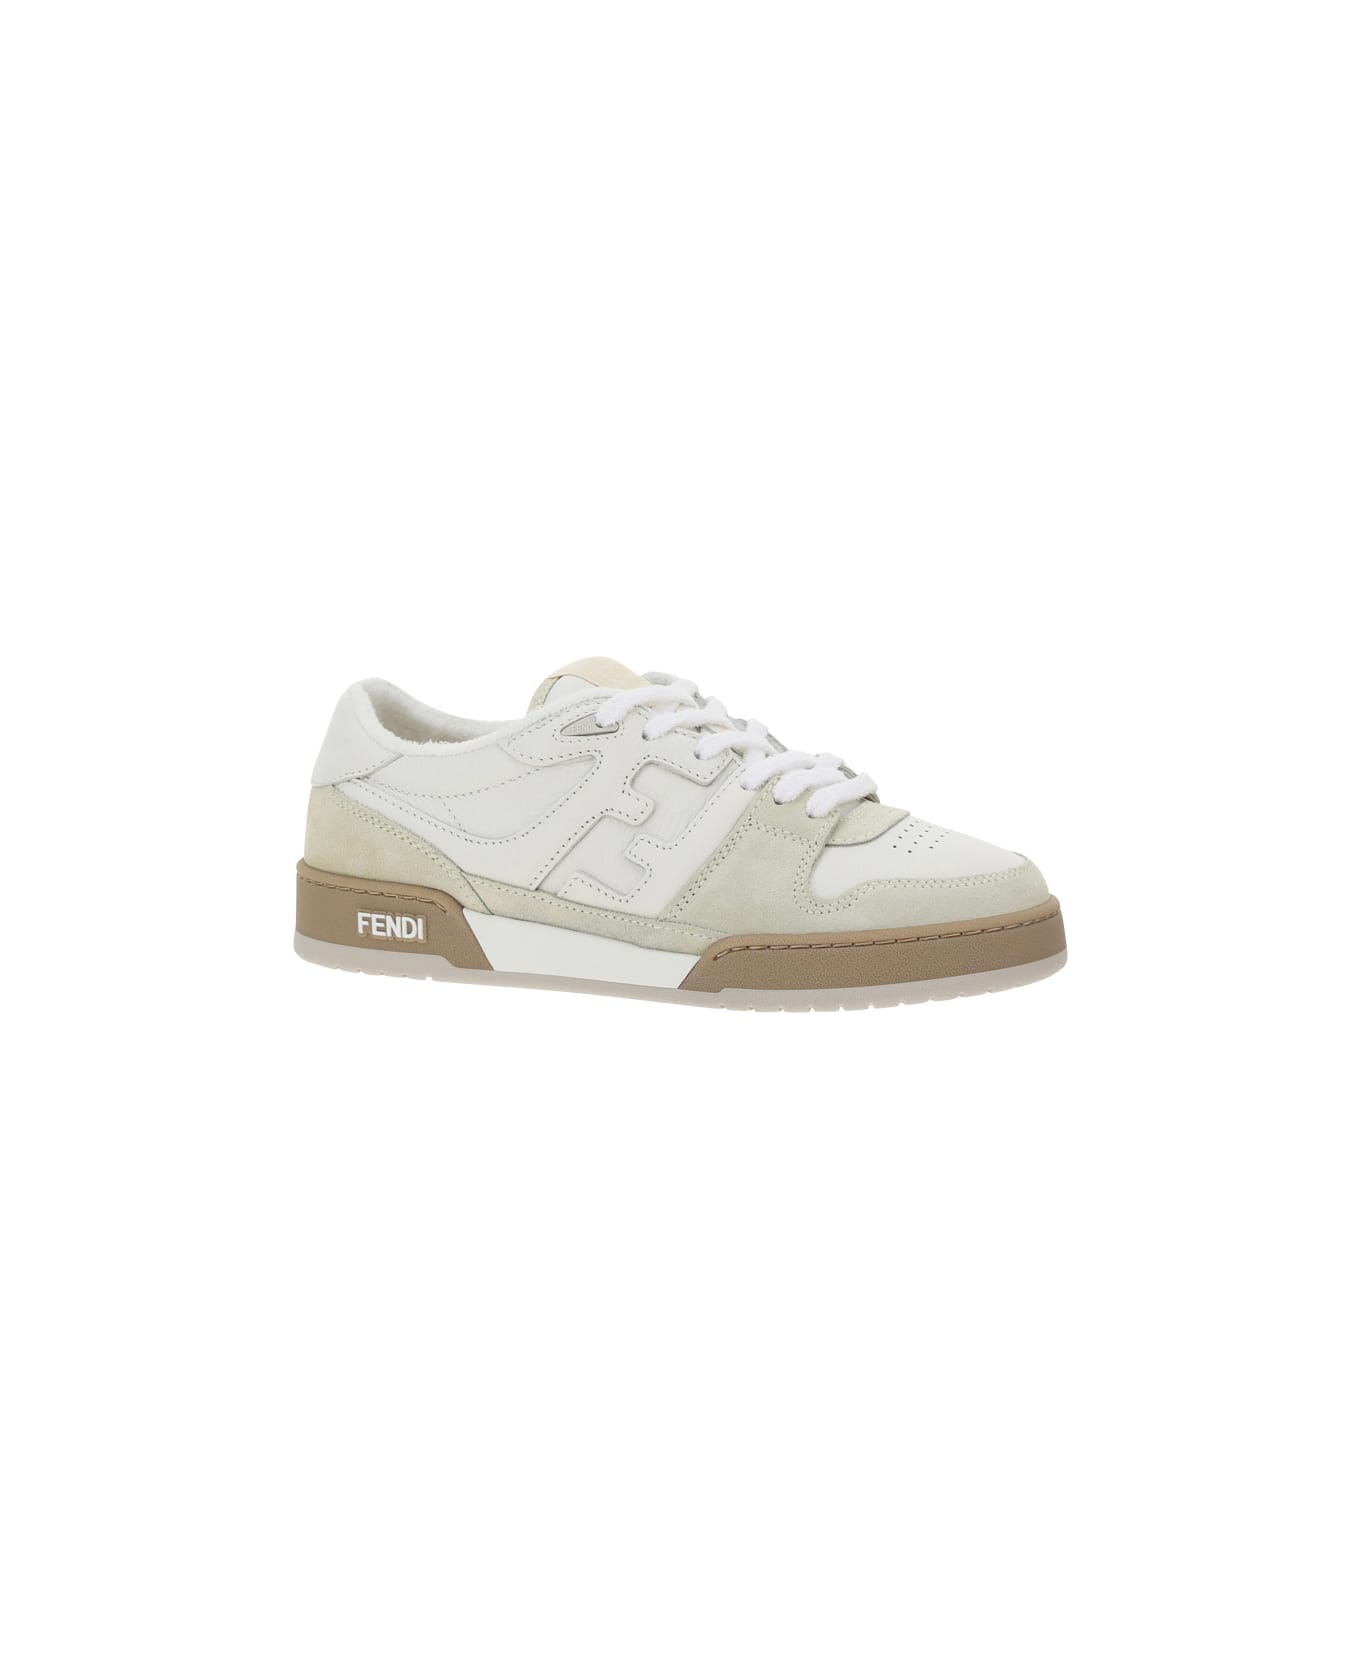 Fendi Match Lace-up Sneakers - White スニーカー